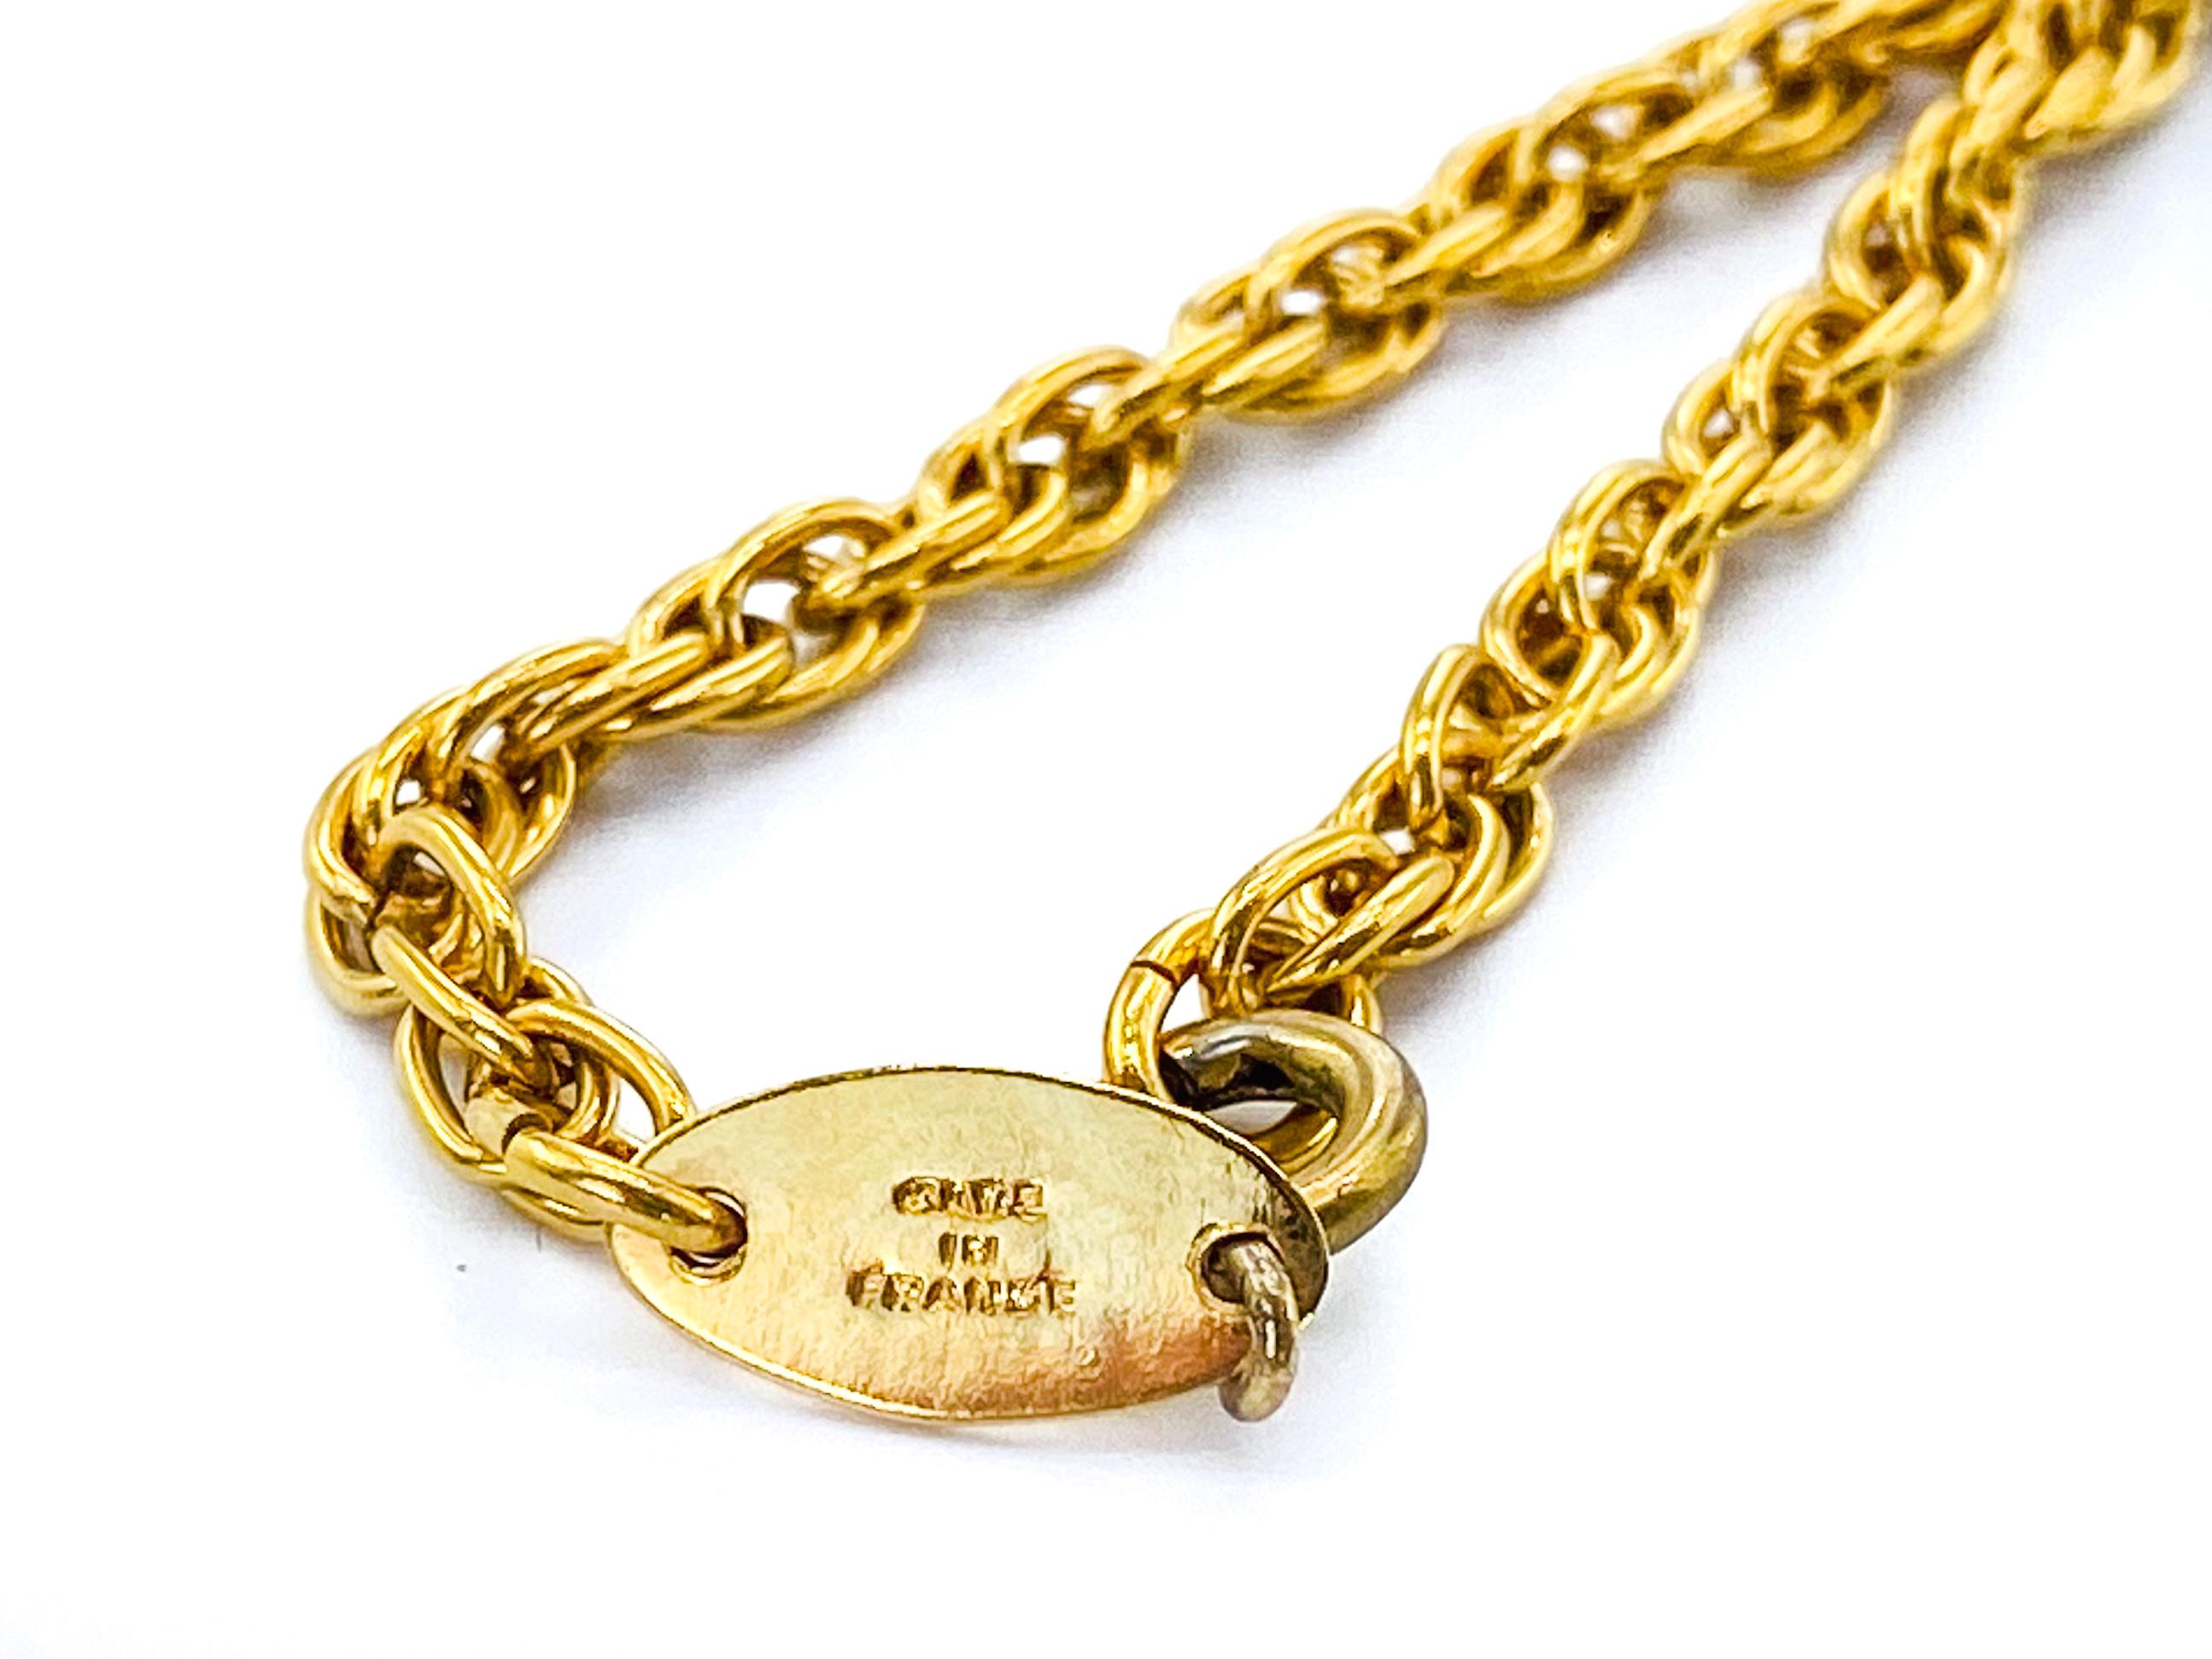 CHANEL Necklace Vintage 1980s Chain Choker 6